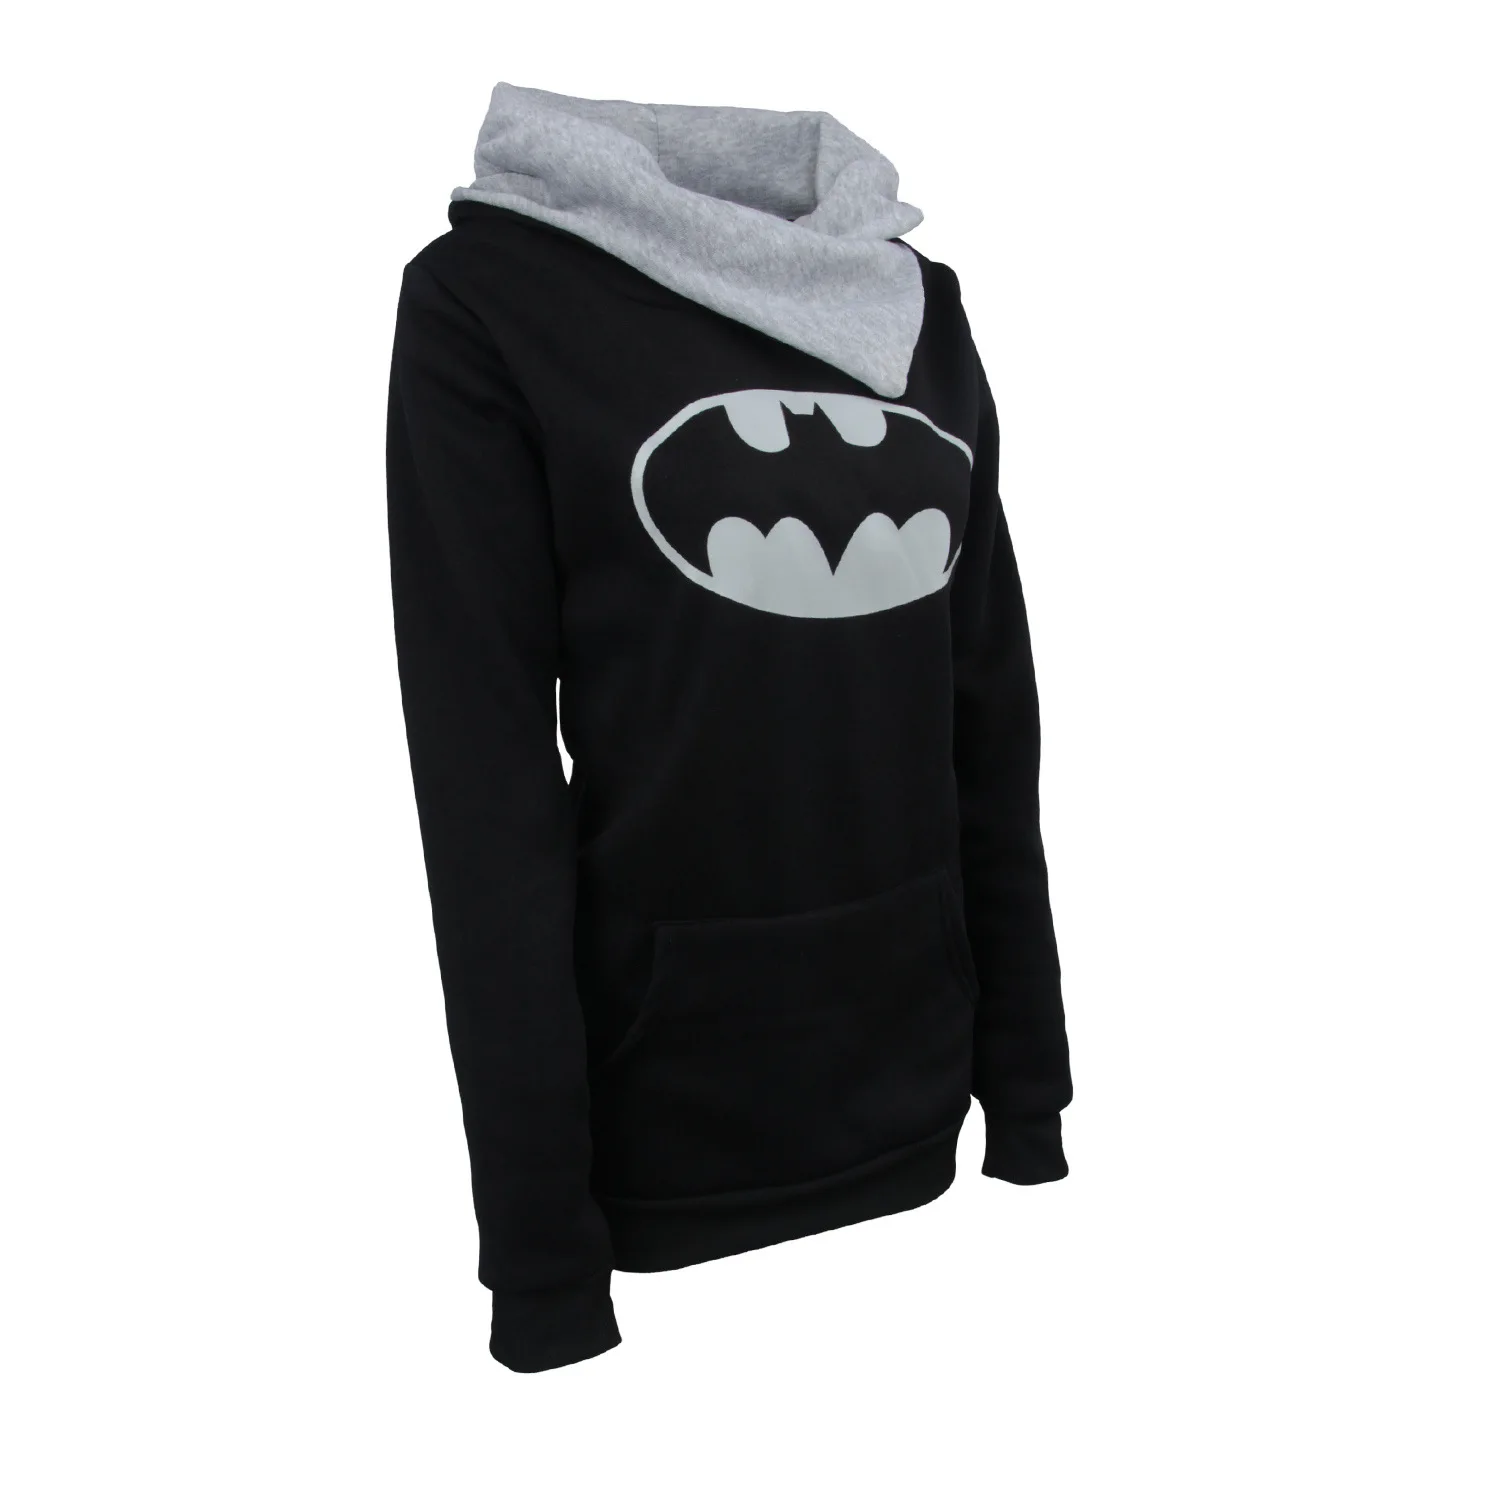  2019 Batman Patterns Women Casual Long Sleeve Hooded Knitted Loose Pullover Jumper Top Girls Clothe